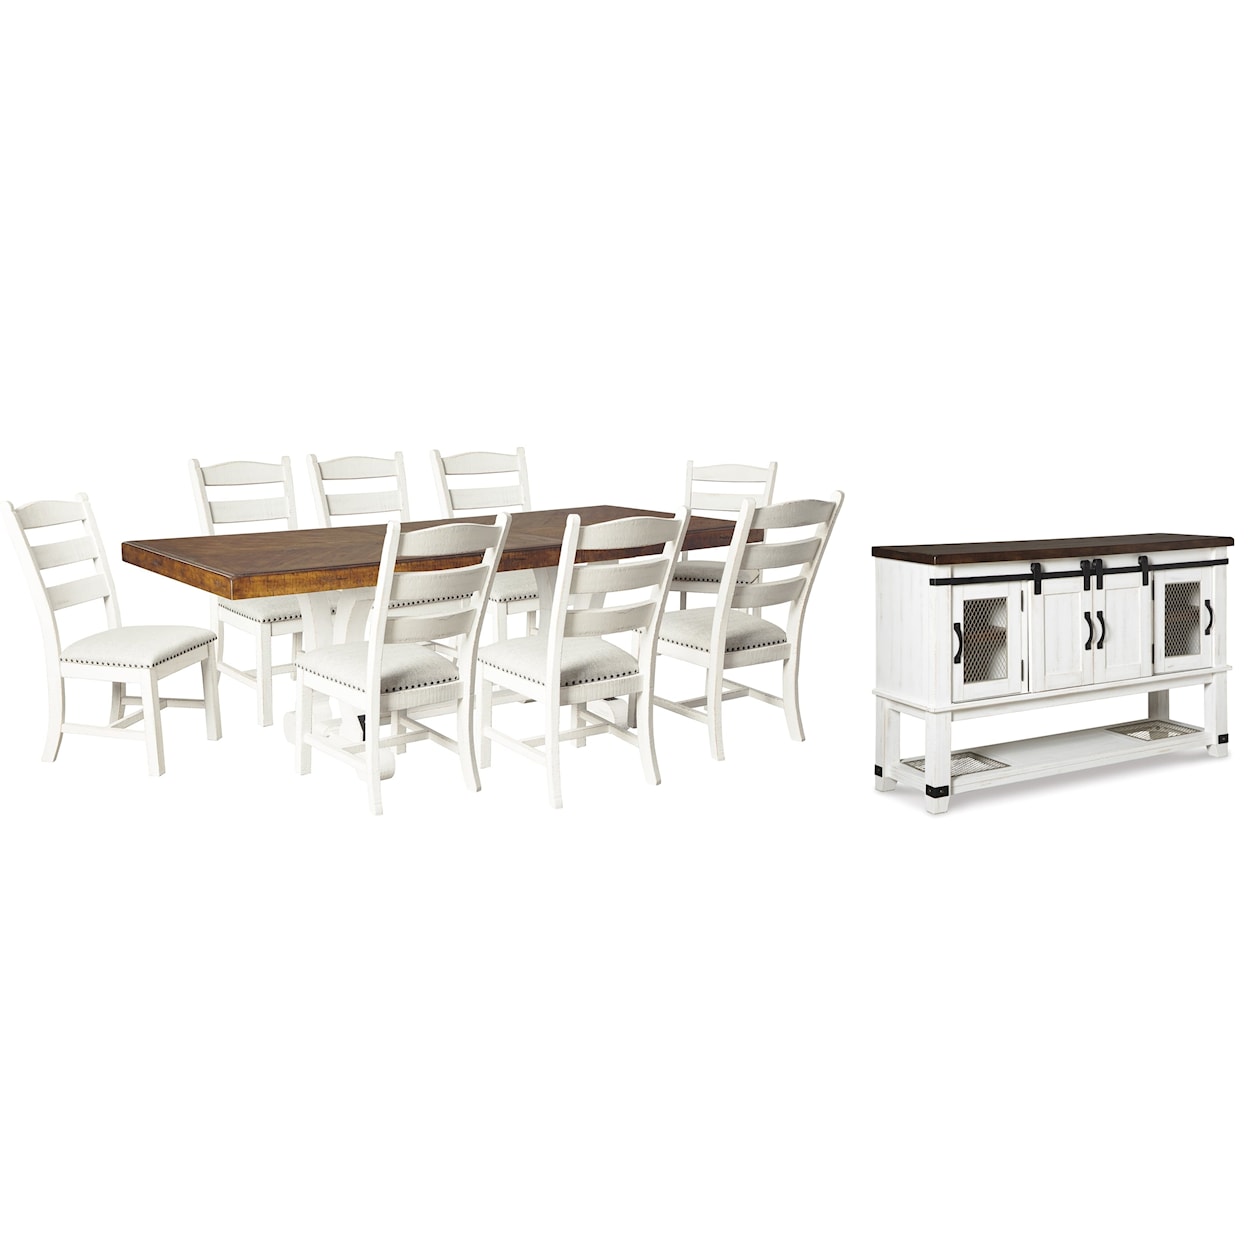 Signature Design by Ashley Furniture Valebeck Dining Table and 8 Chairs with Server